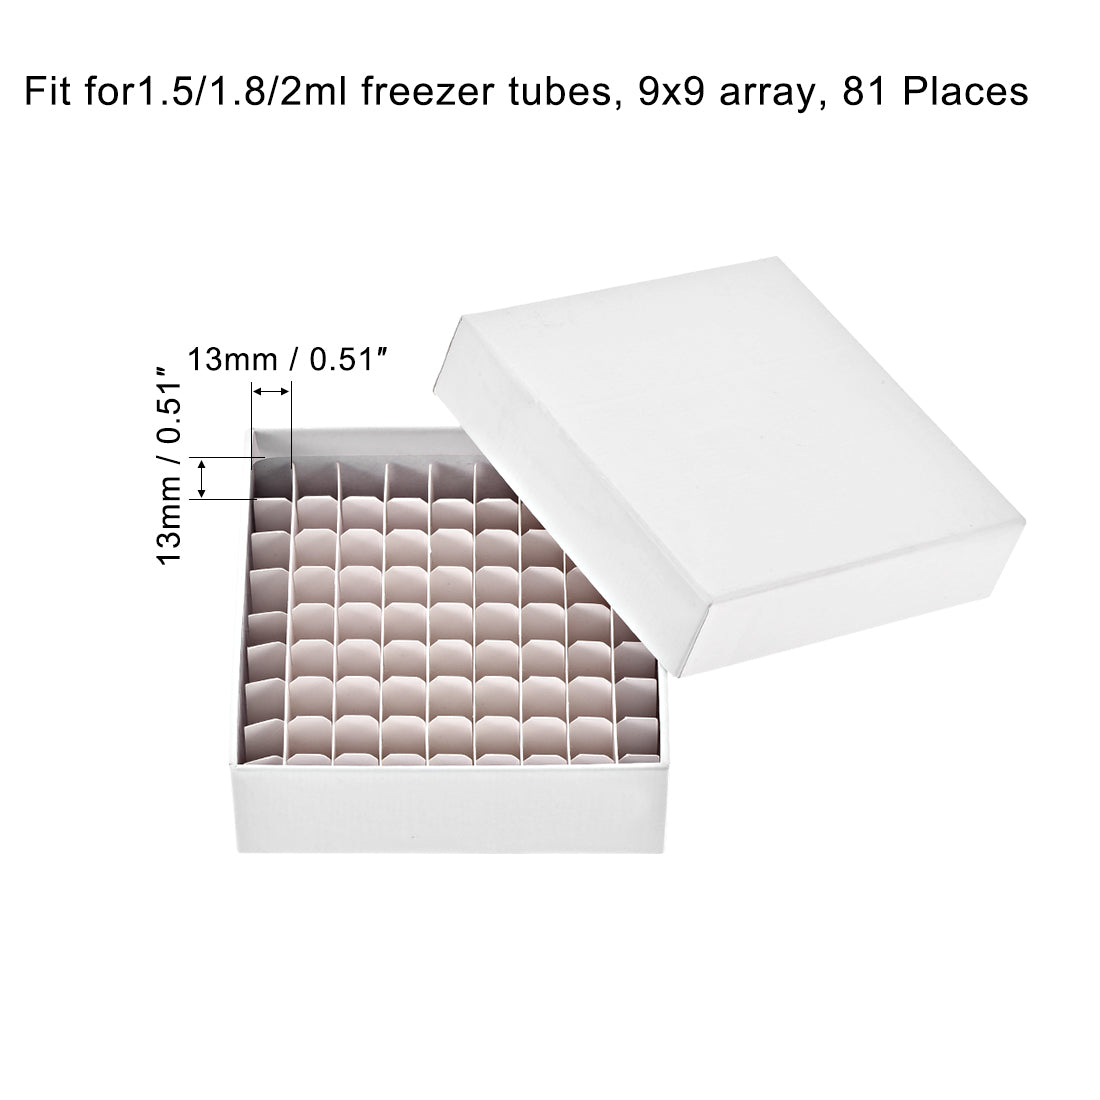 uxcell Uxcell Freezer Tube Box 81 Places Cardboard Holder Rack for 1.5/1.8/2ml Microcentrifuge Tubes 5Pcs